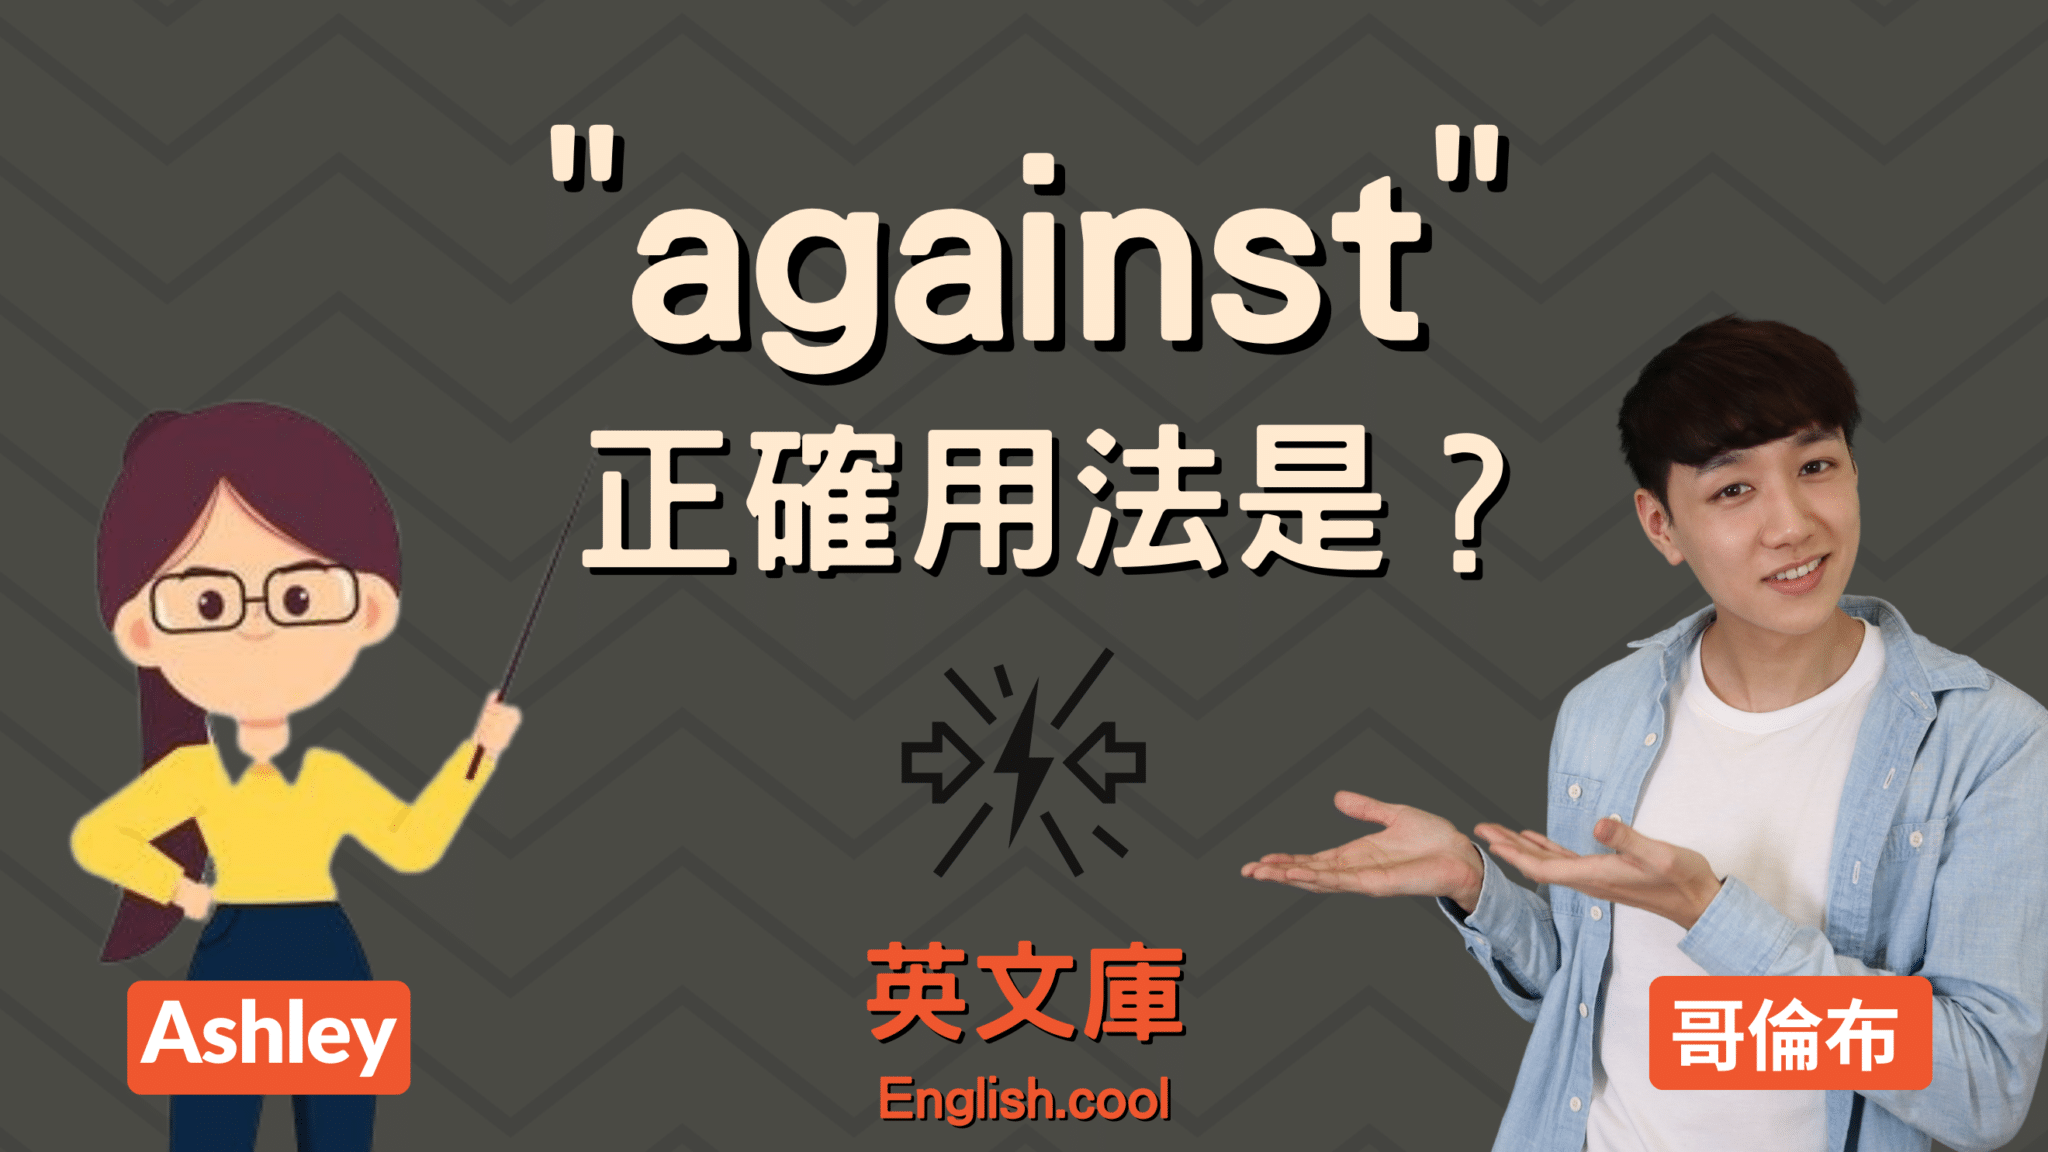 You are currently viewing 「against」正確用法是？來看例句學各種用法！